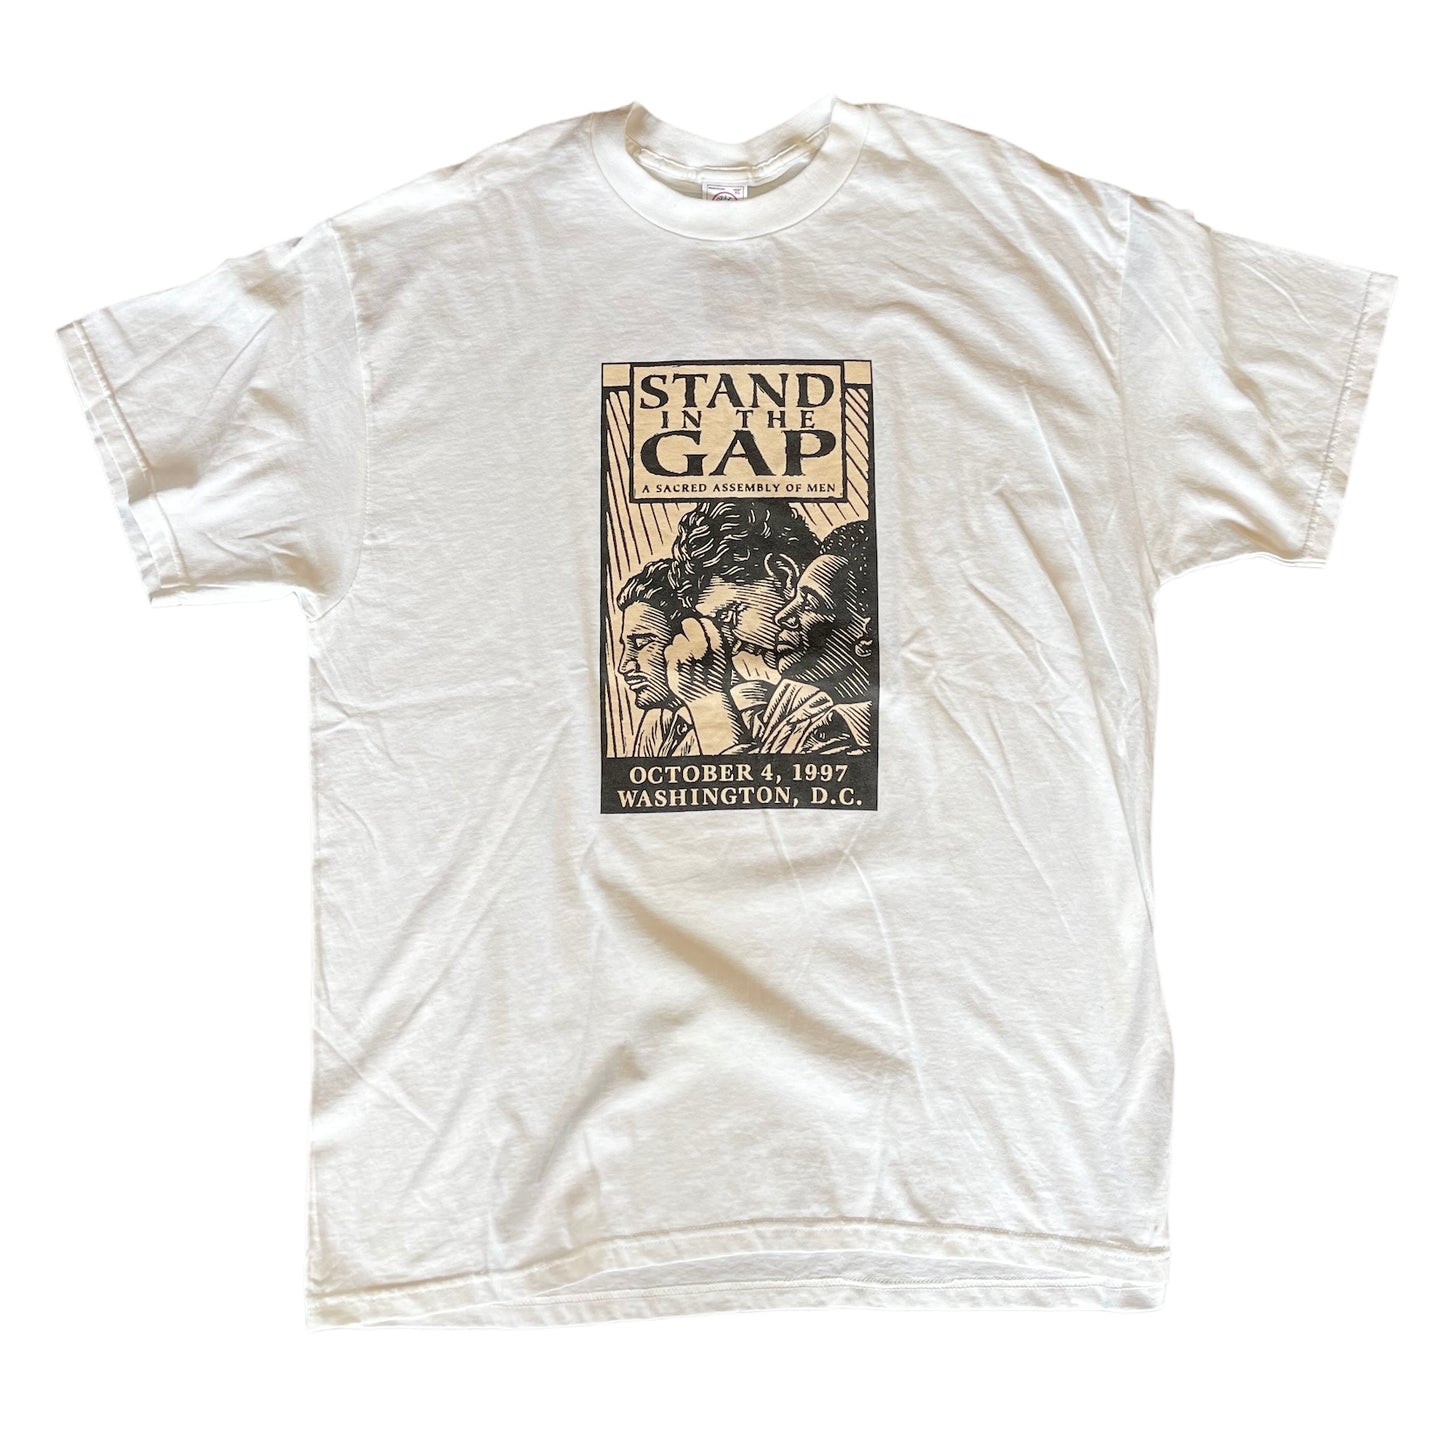 Stand in the Gap Assembly of Men Tee